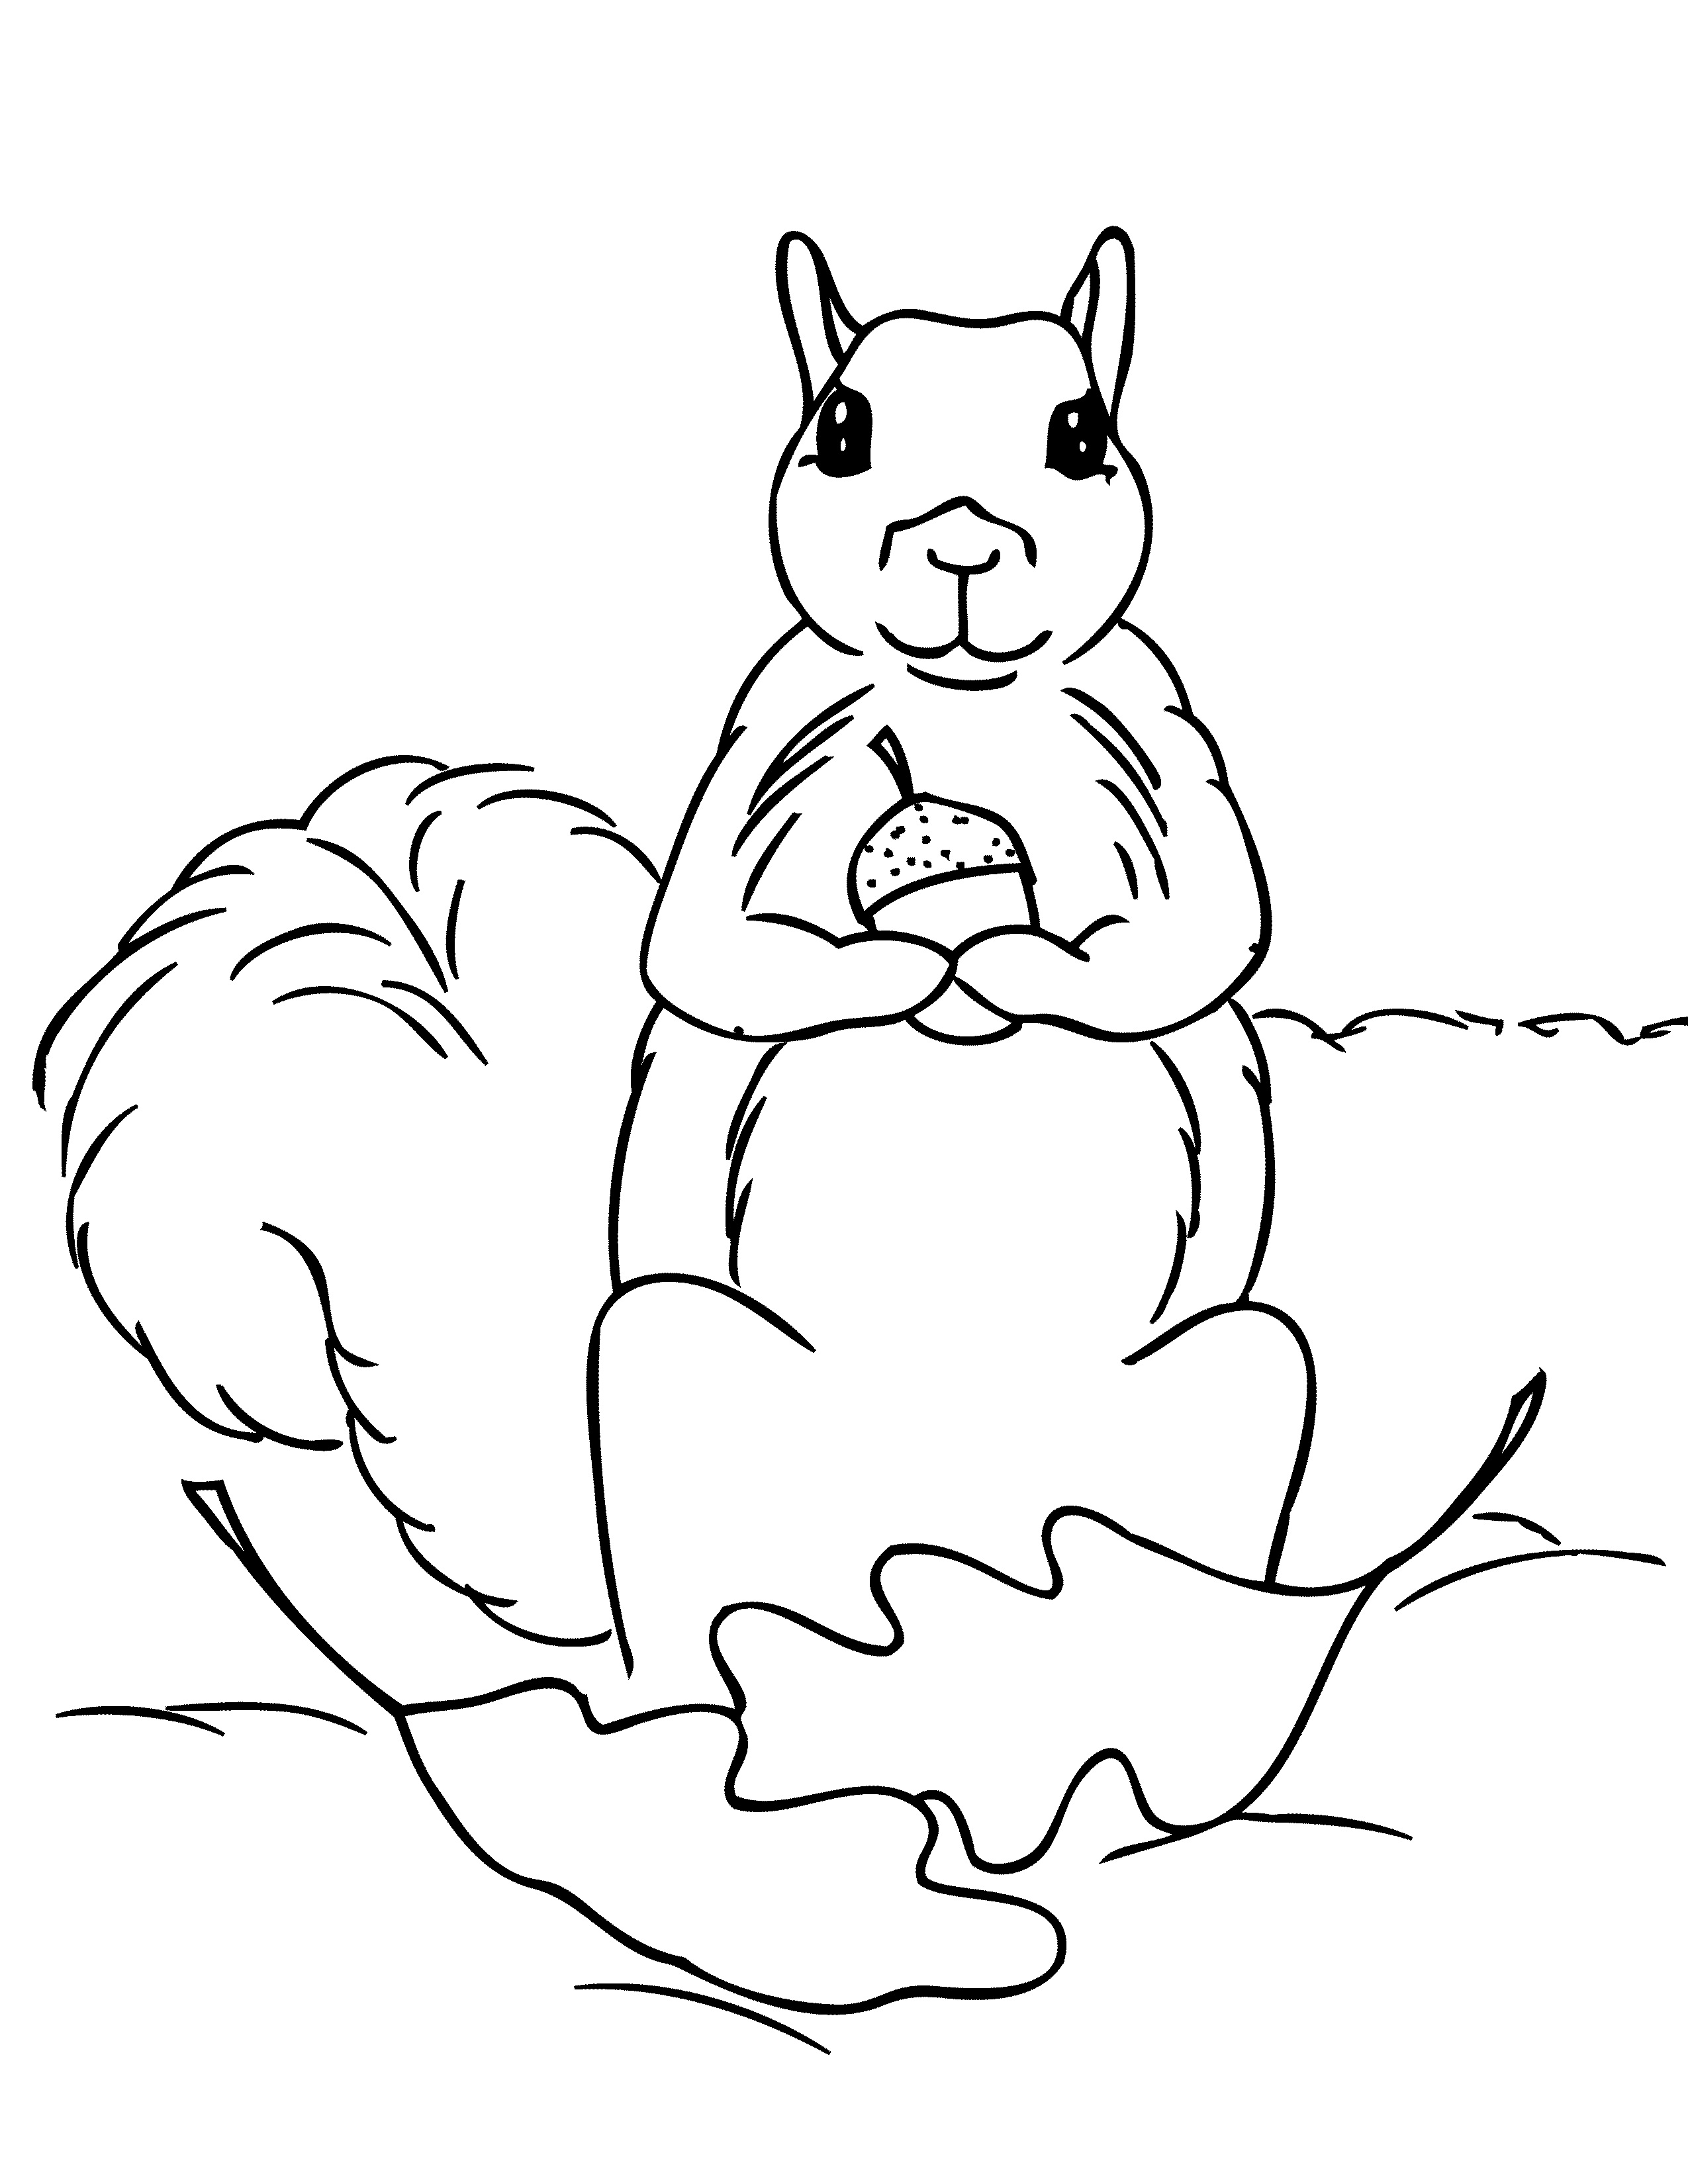 Download Squirrel Coloring Page Photo - Animal Place